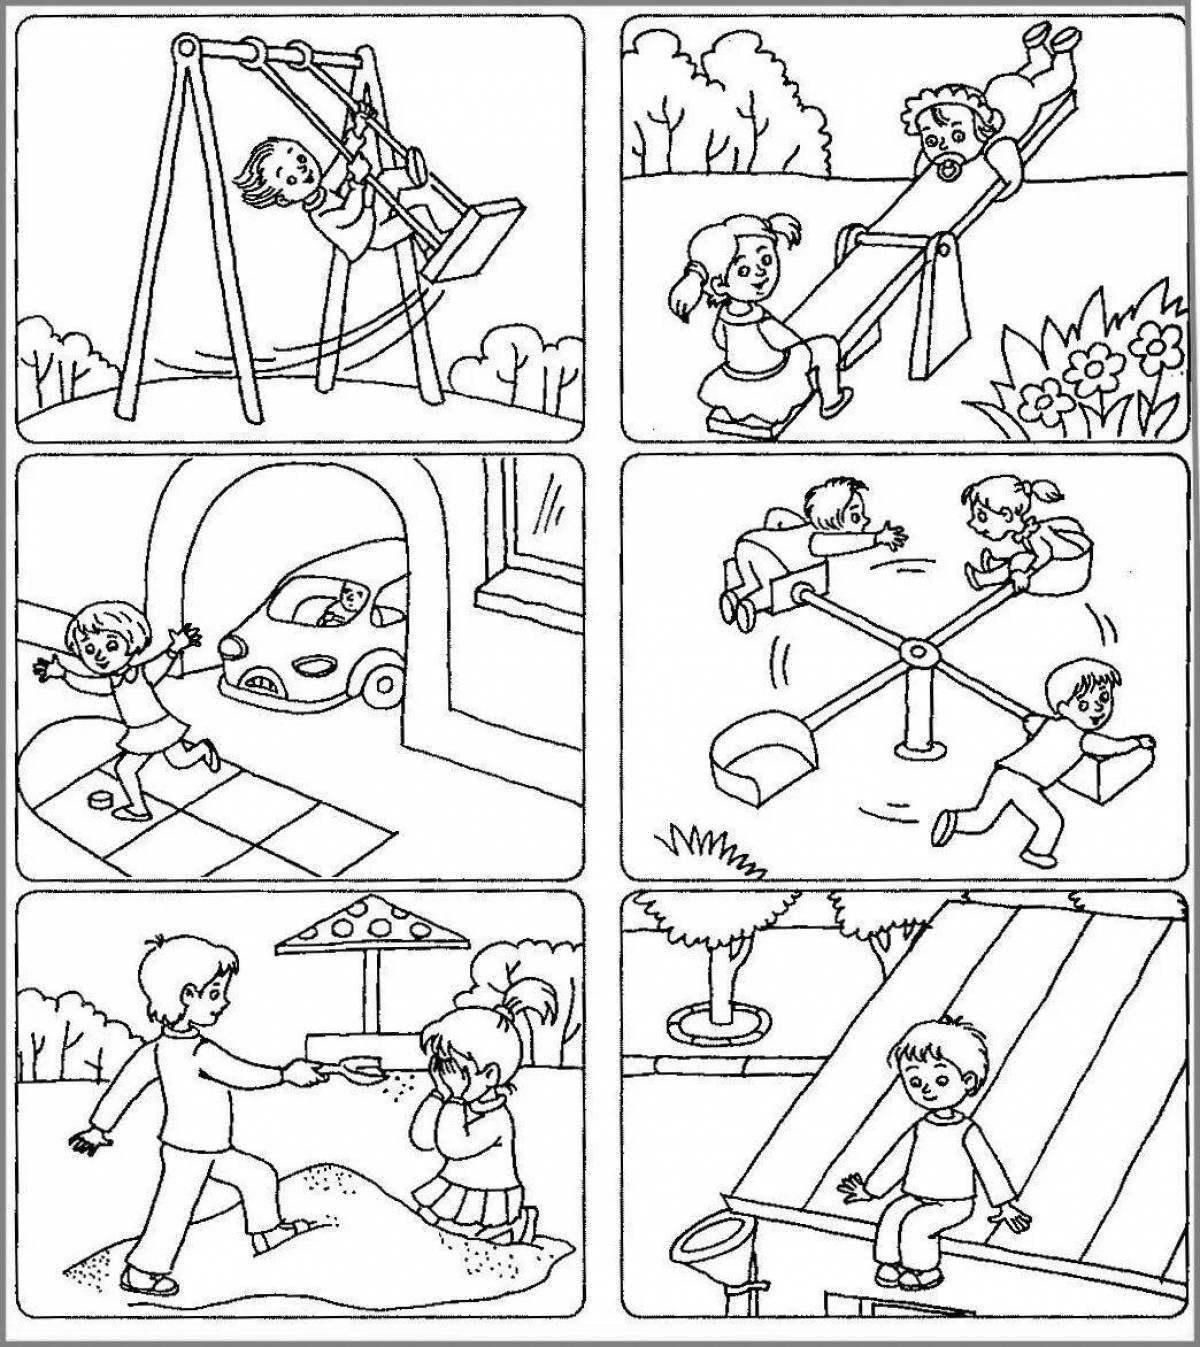 Coloring book funny safety rules